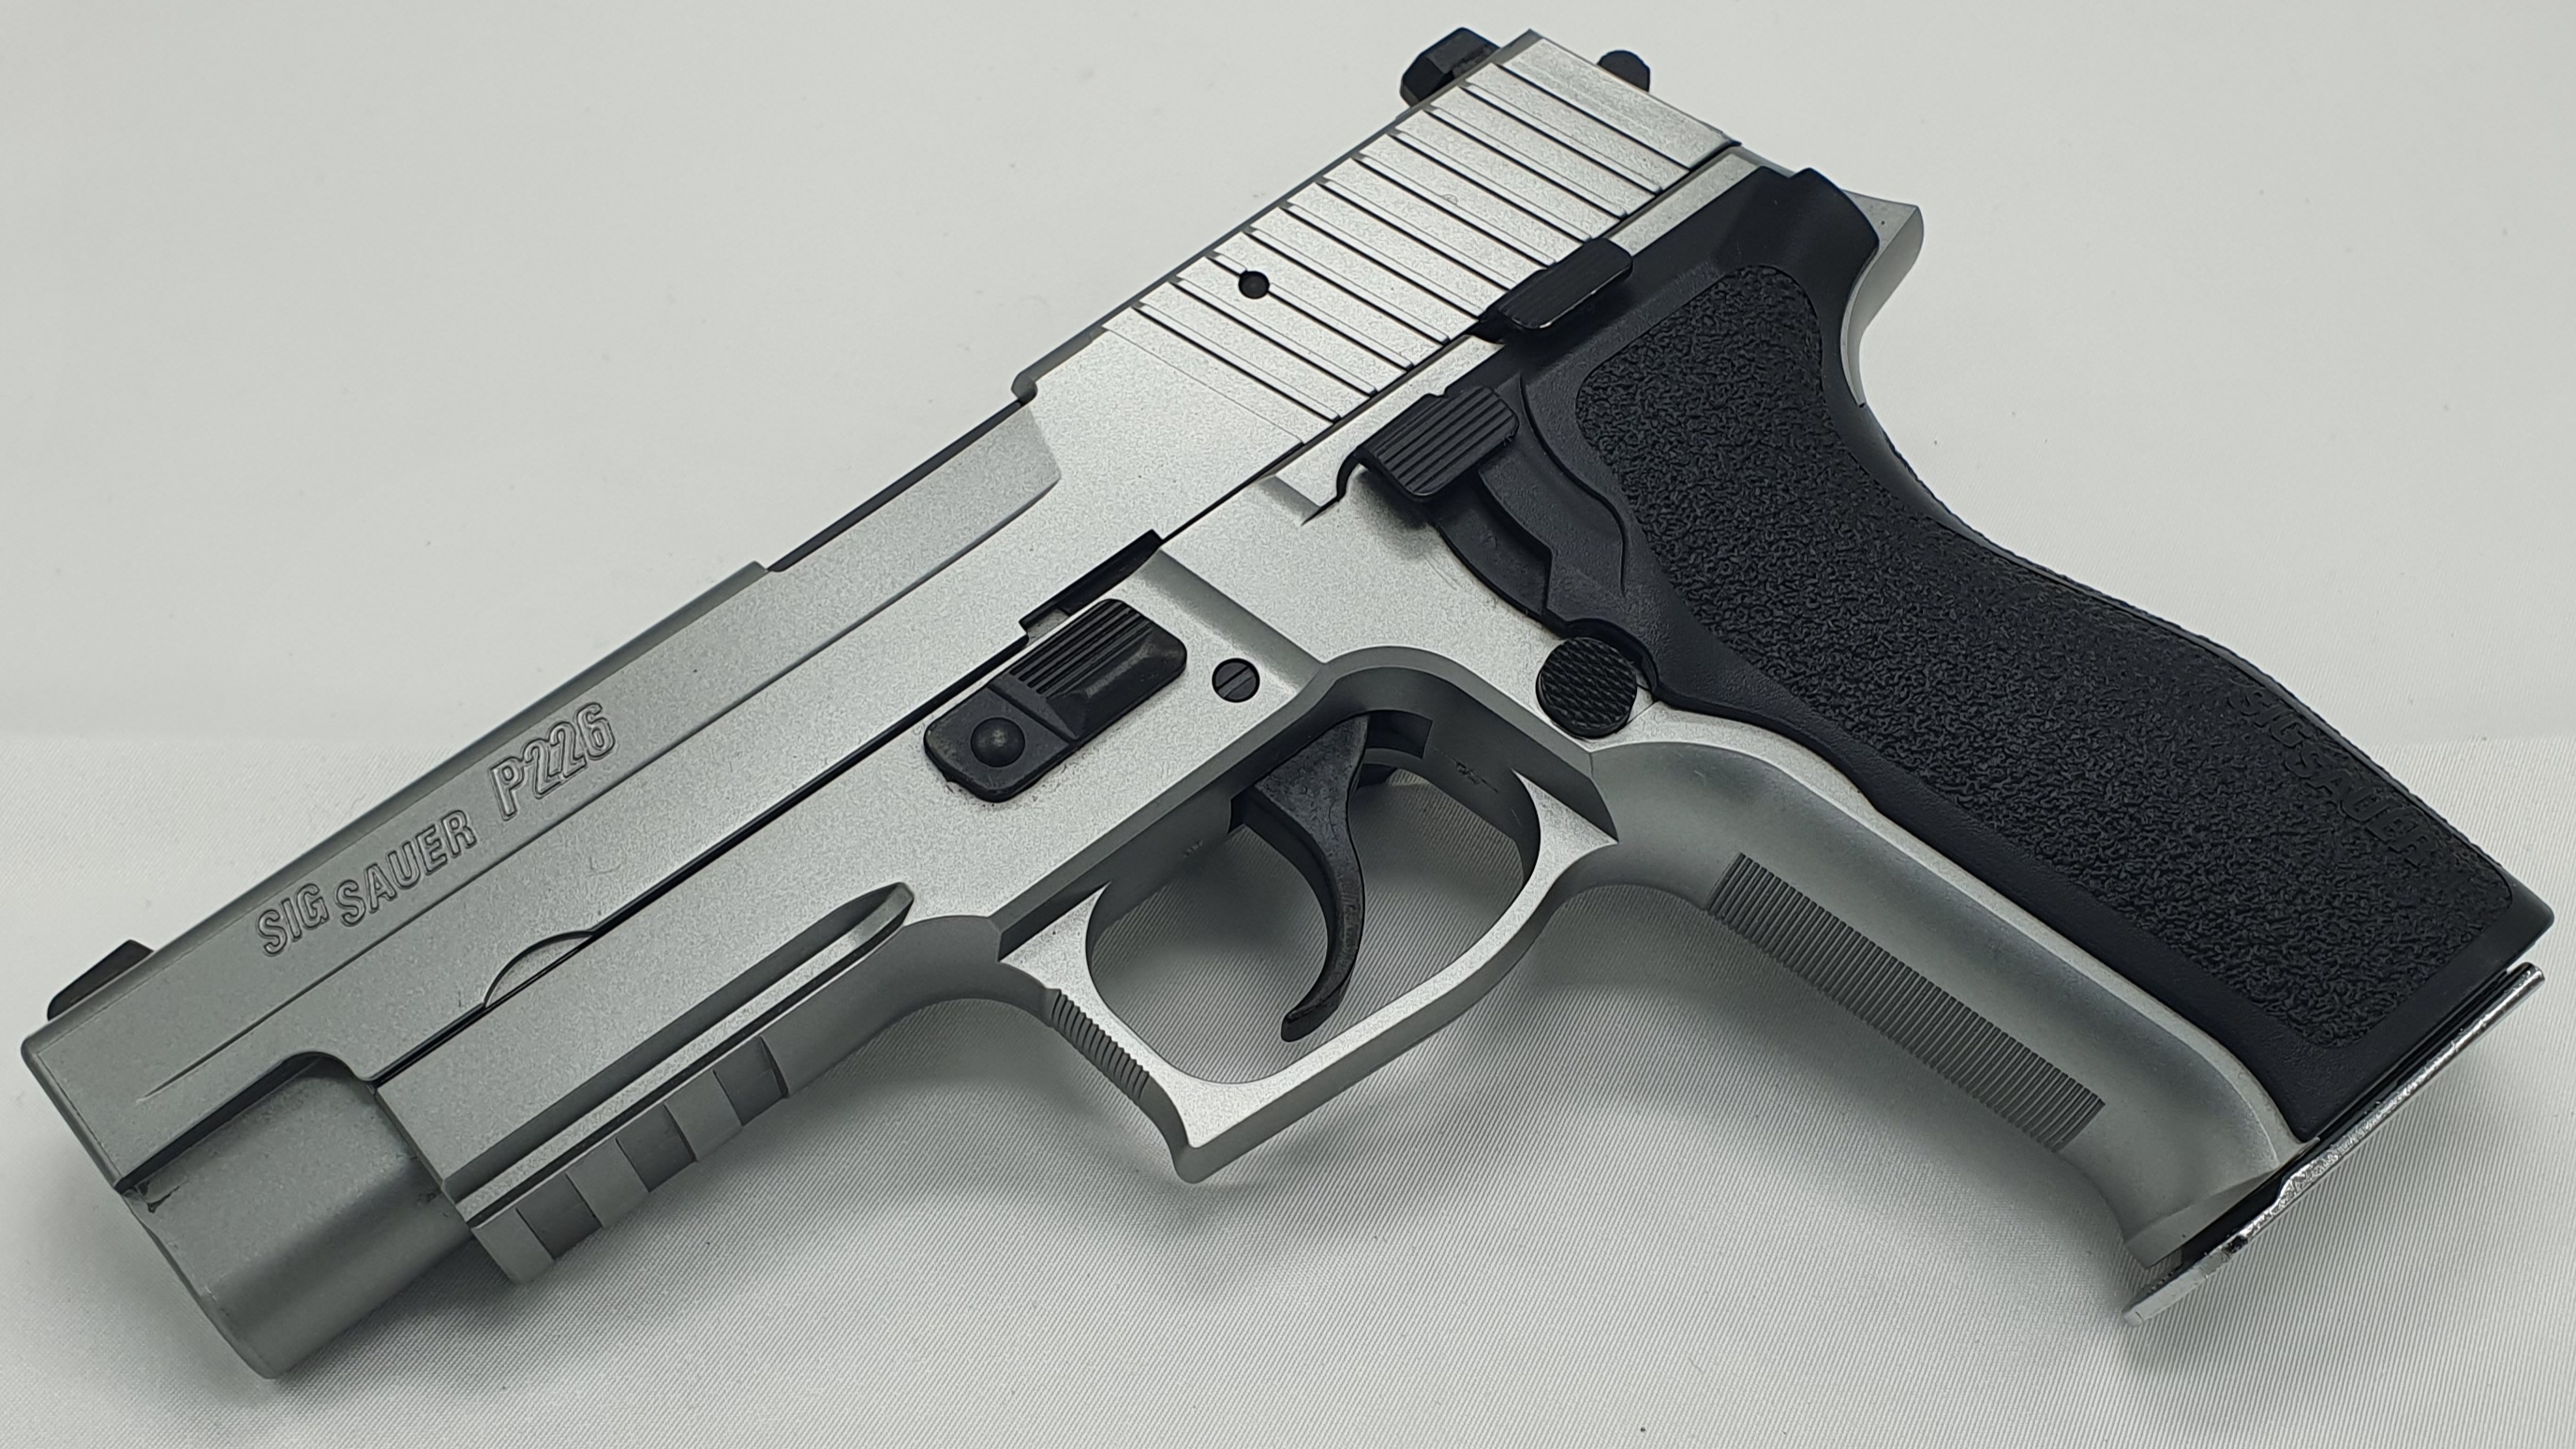 Tokyo Marui SIG P226 E2 Stainless | Super5ives